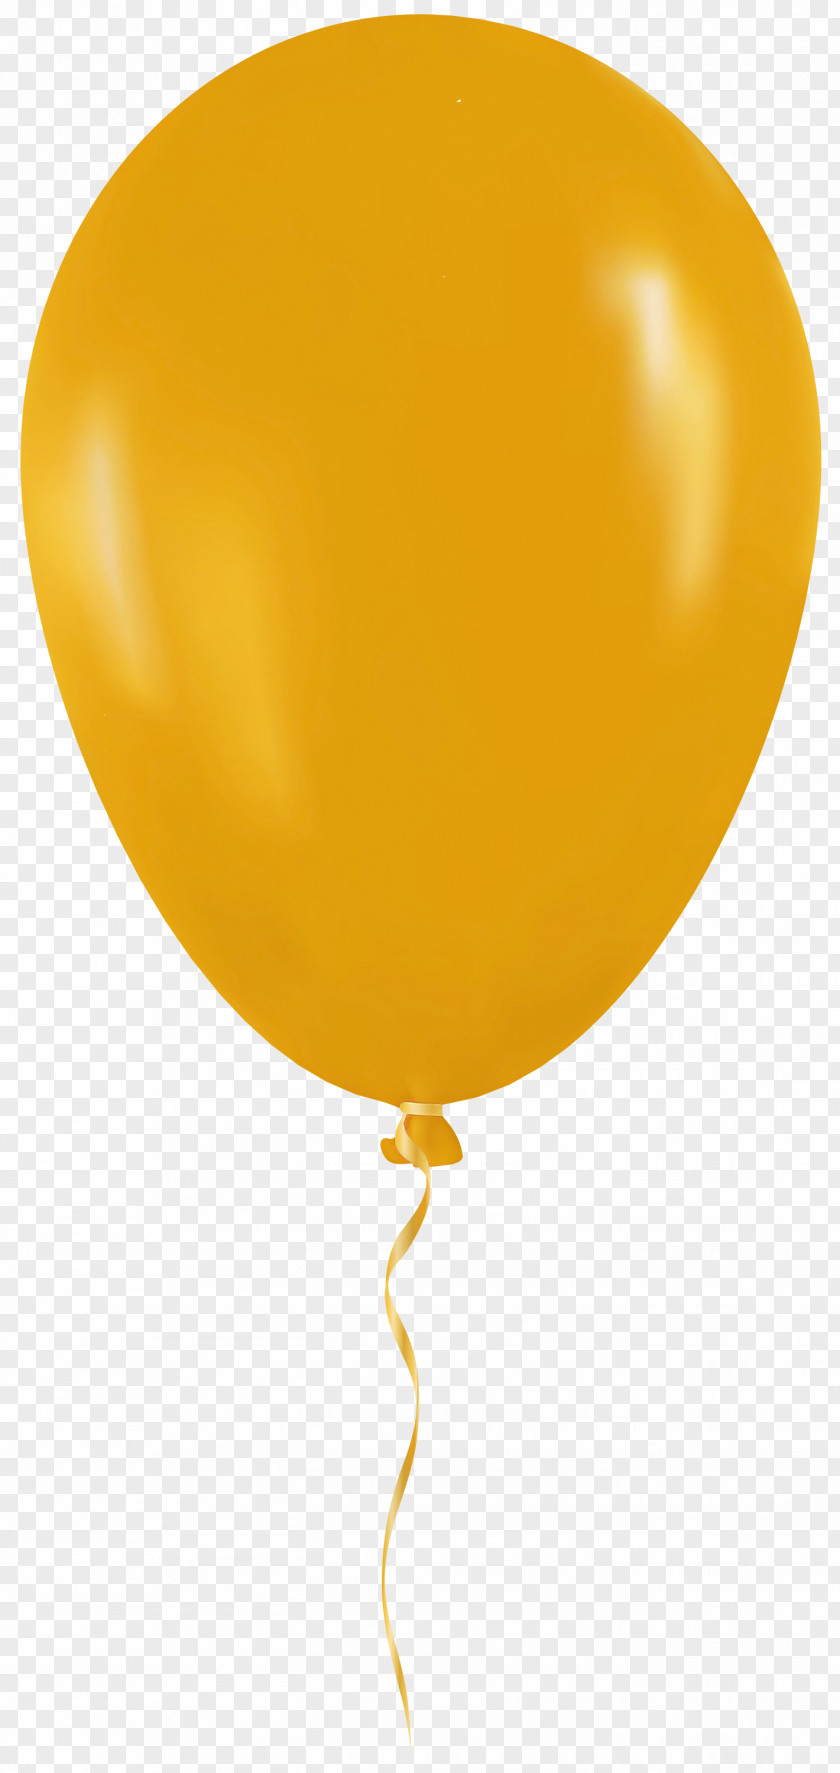 Orange Party Supply PNG